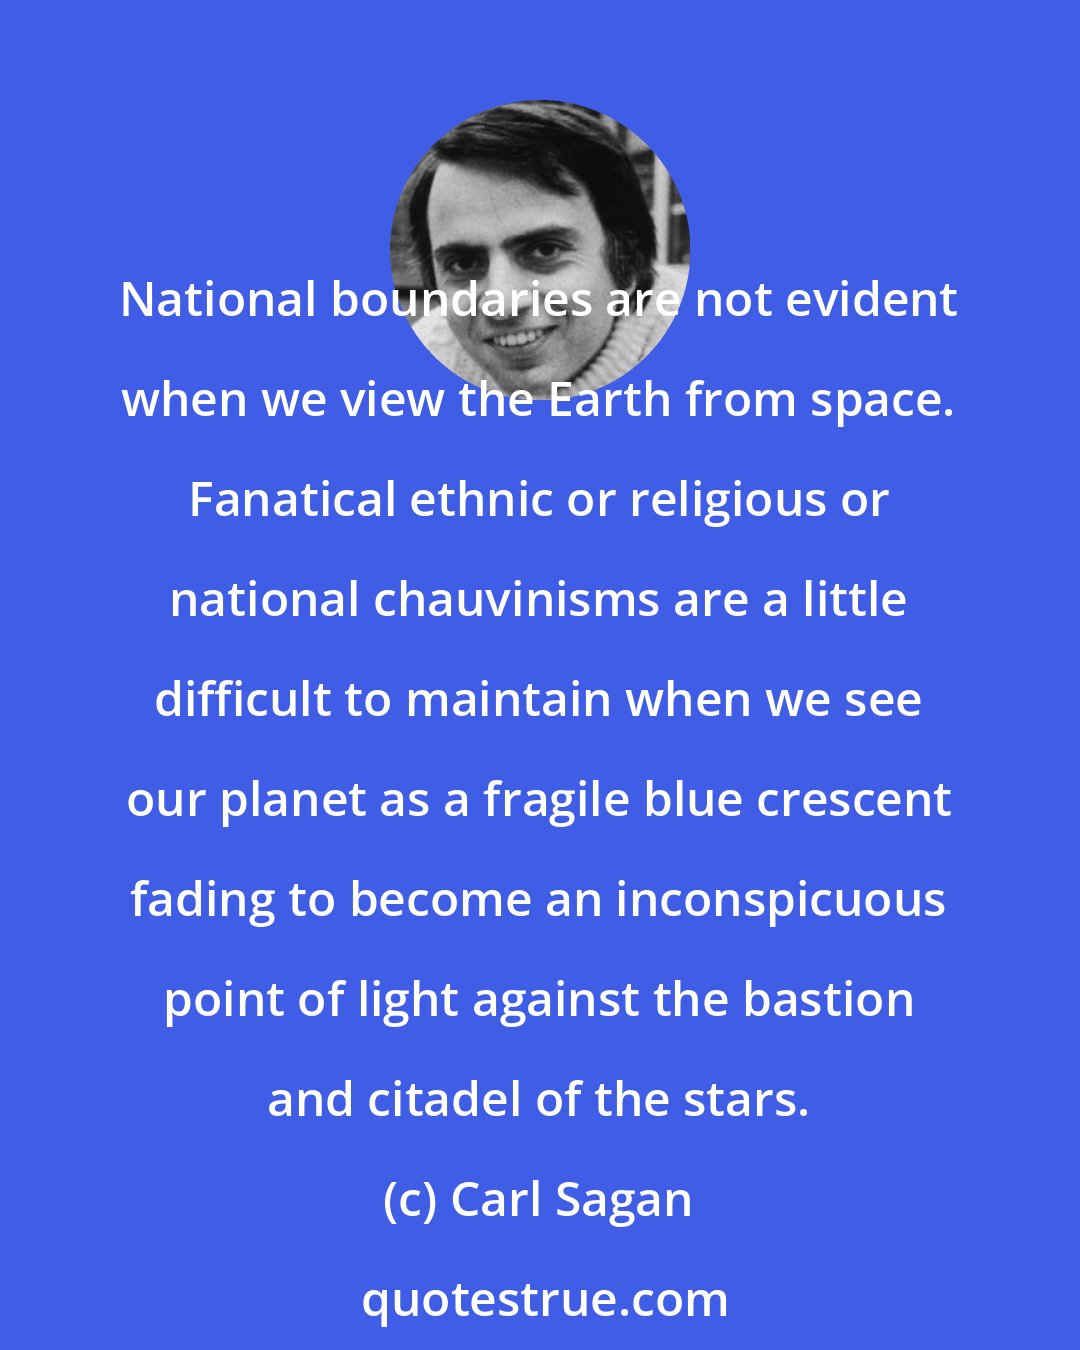 Carl Sagan: National boundaries are not evident when we view the Earth from space. Fanatical ethnic or religious or national chauvinisms are a little difficult to maintain when we see our planet as a fragile blue crescent fading to become an inconspicuous point of light against the bastion and citadel of the stars.